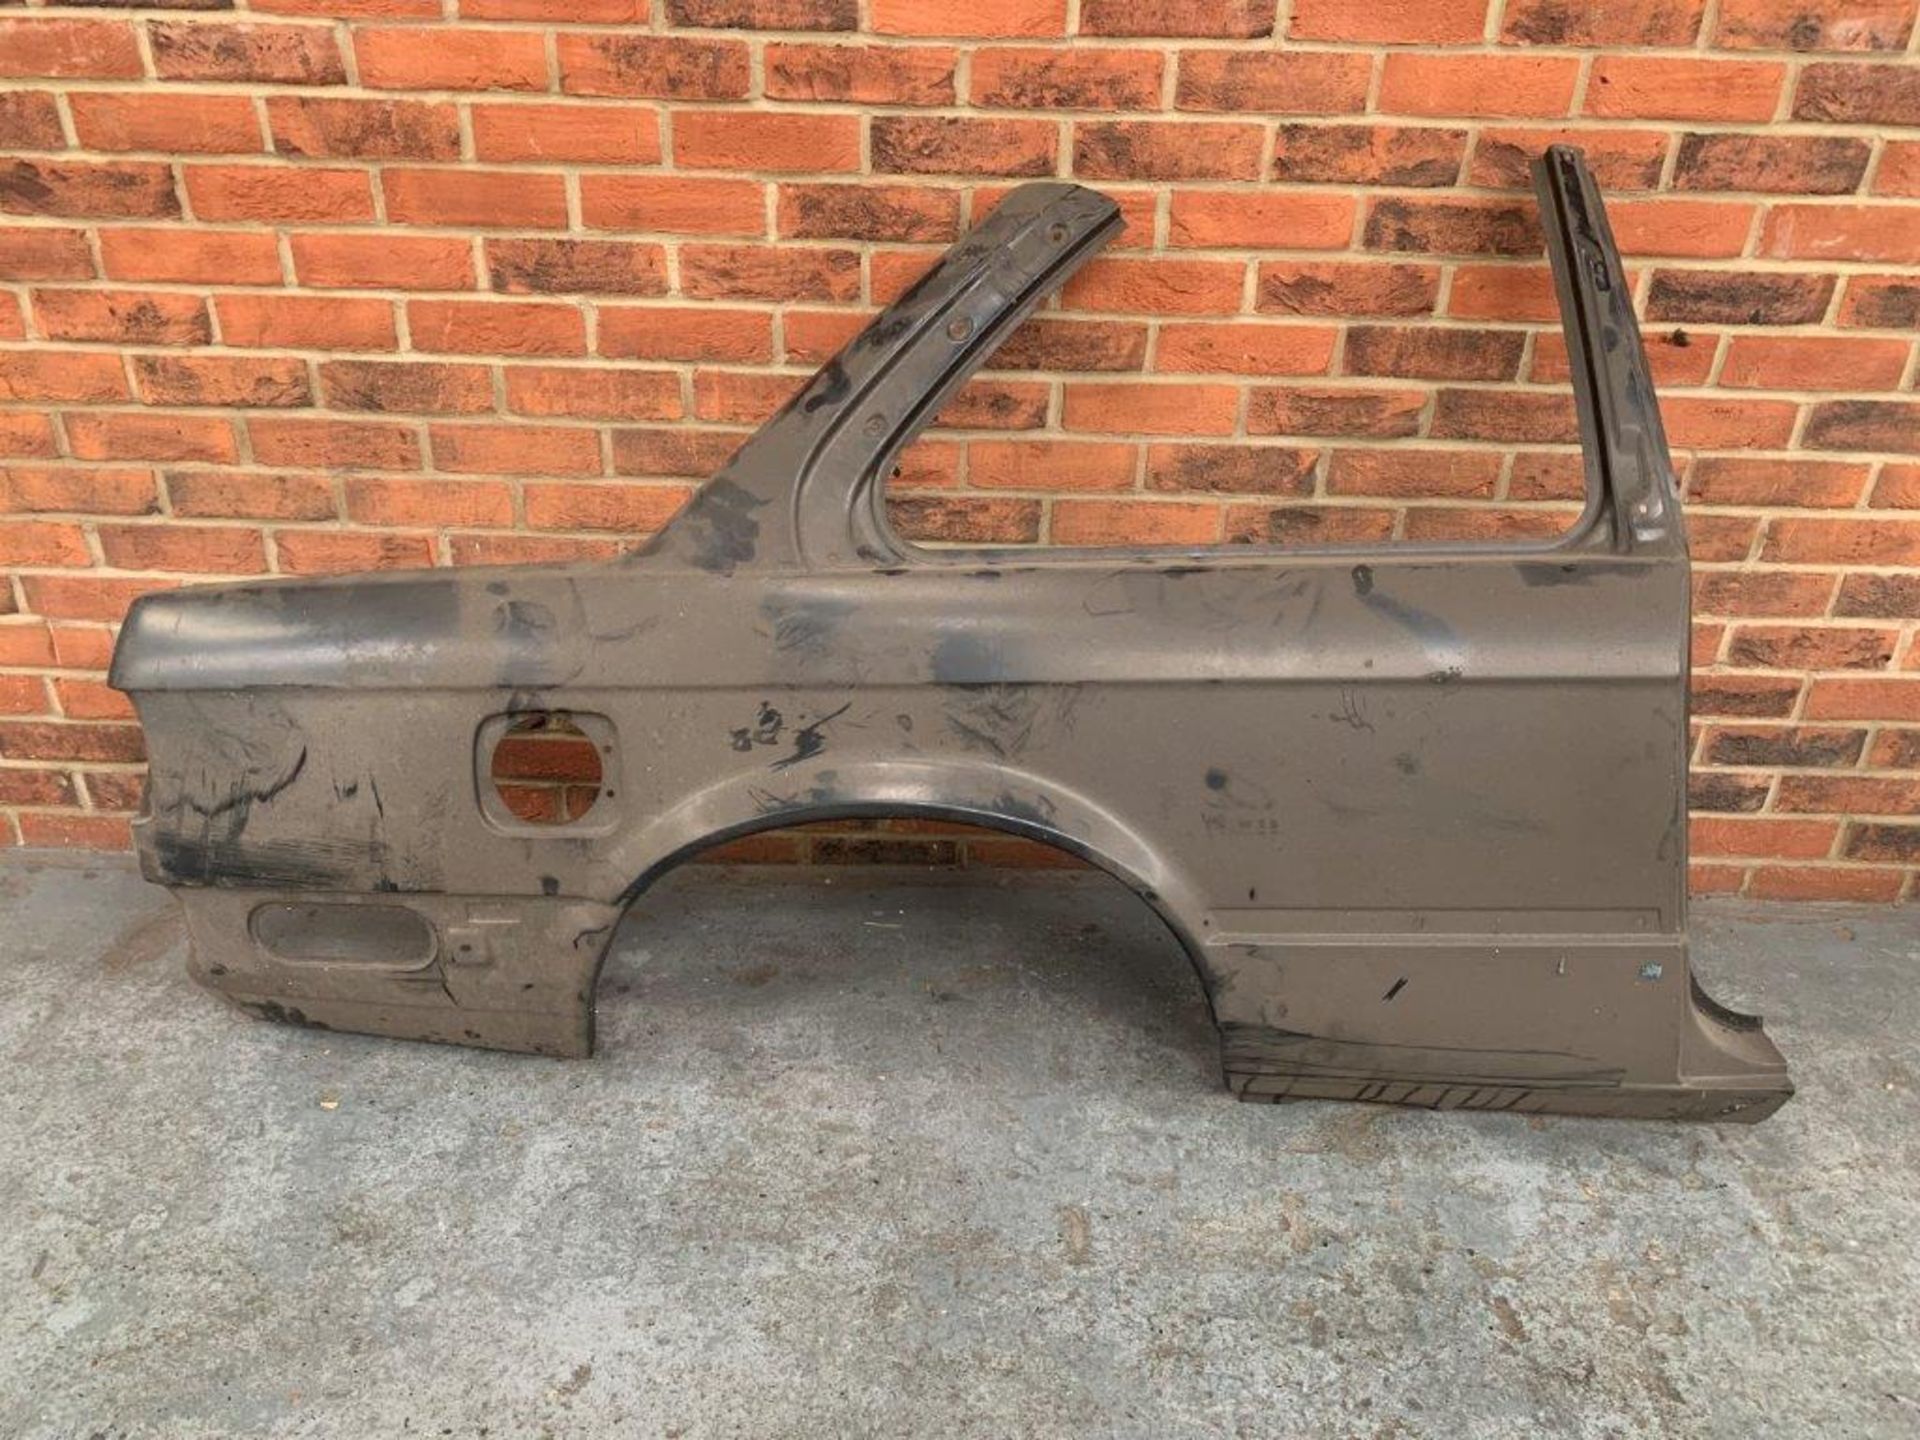 New Old Stock BMW E30 Rear Quarter Panels - Image 2 of 7